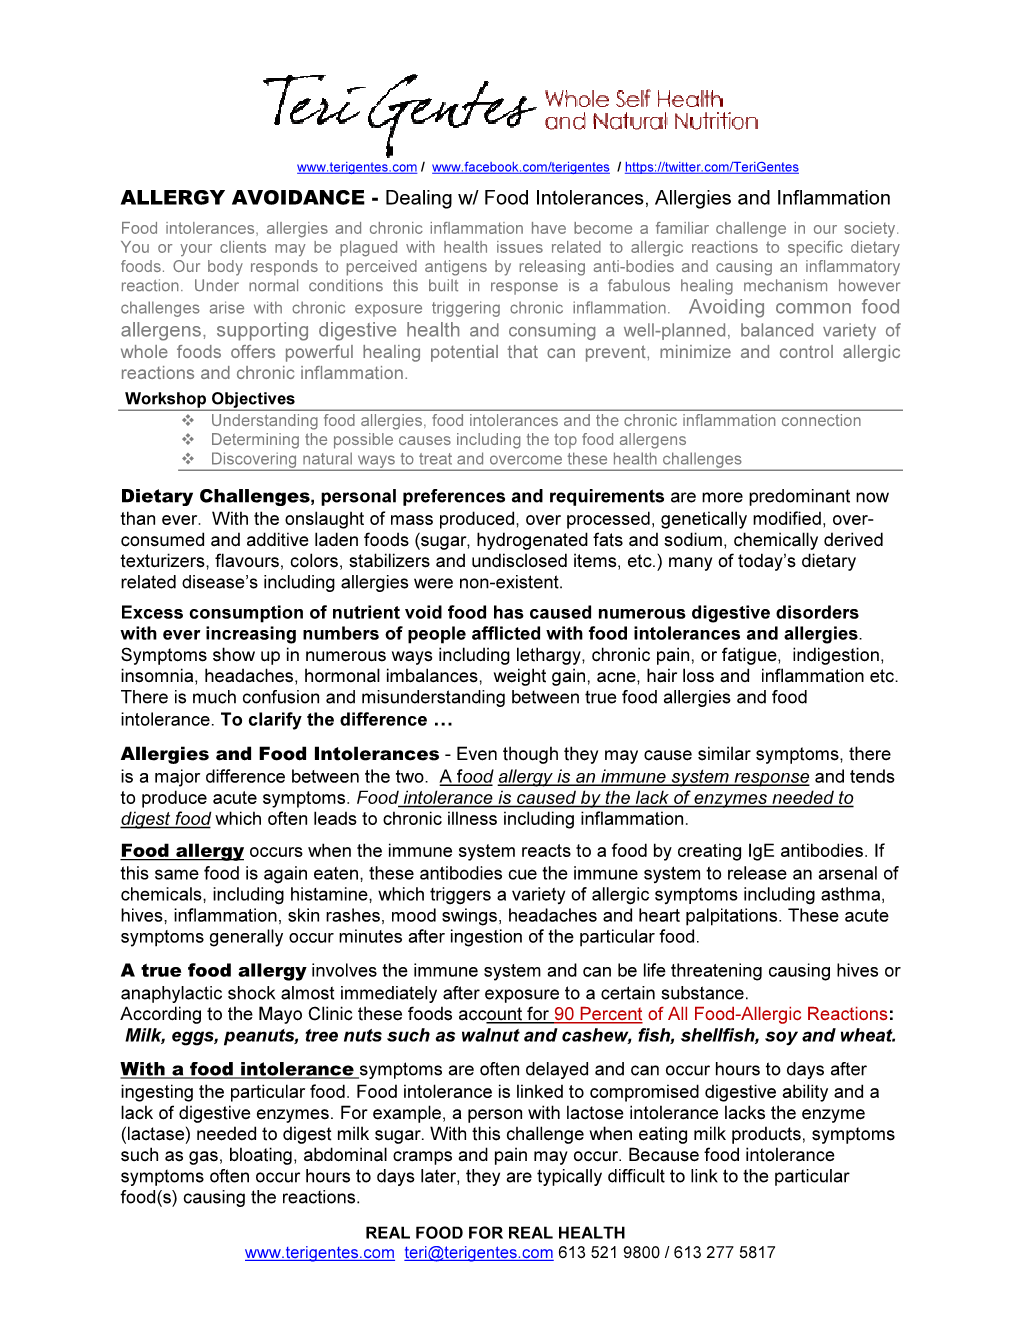 ALLERGY AVOIDANCE - Dealing W/ Food Intolerances, Allergies and Inflammation